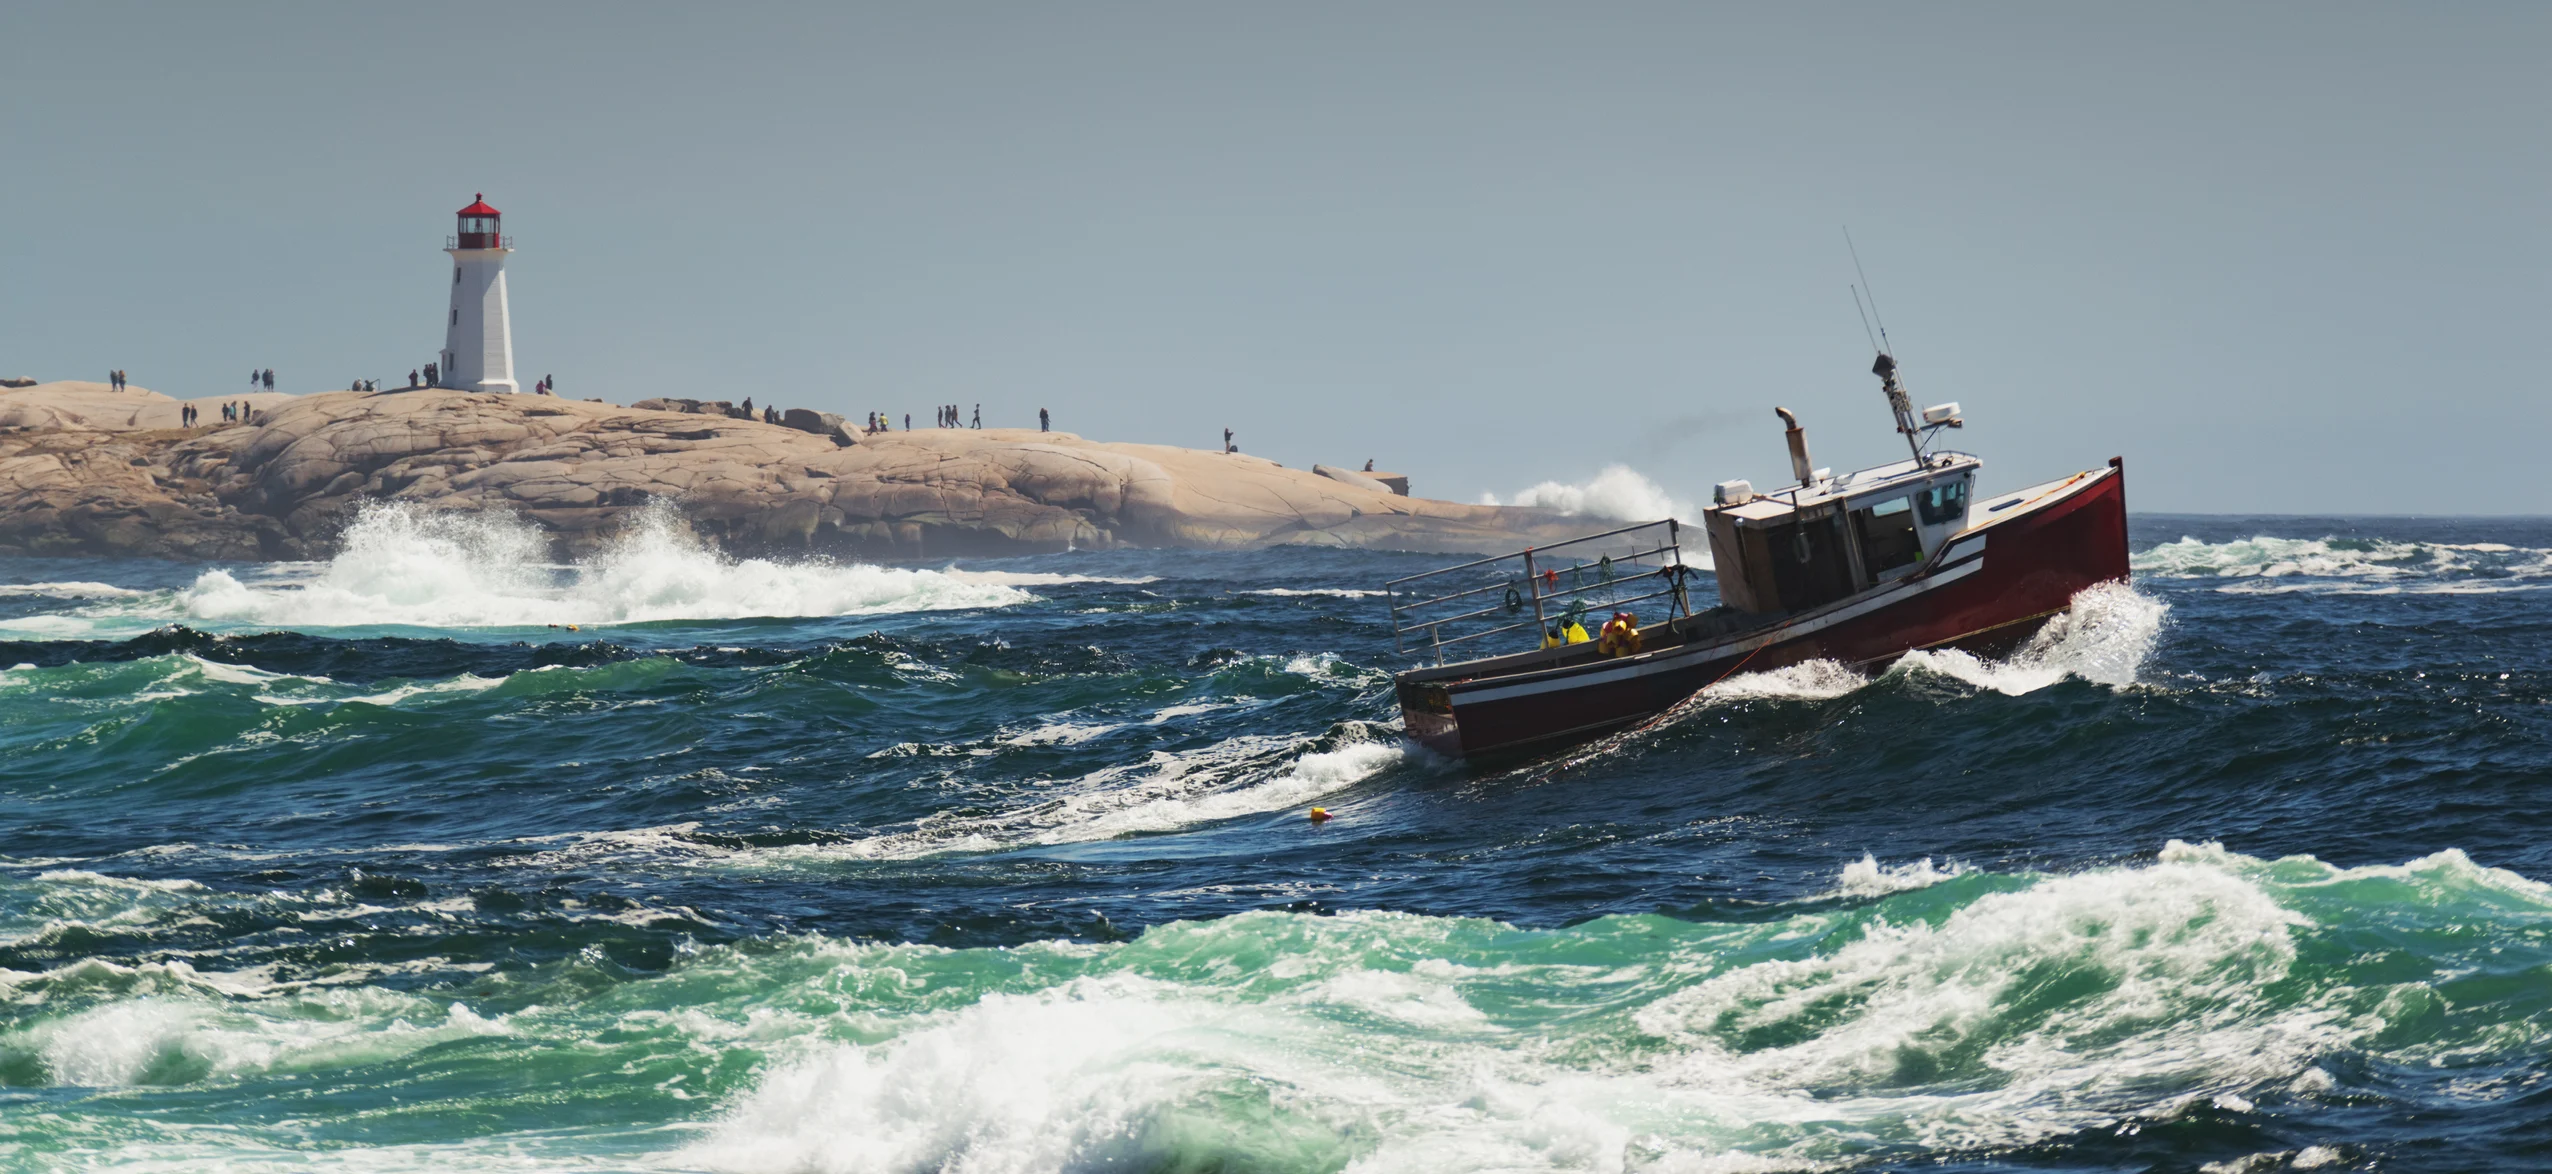 Lobster boat hauls traps in heavy surf near Peggy's Cove Lighthouse. Credit: shaunl. E+. Getty Images